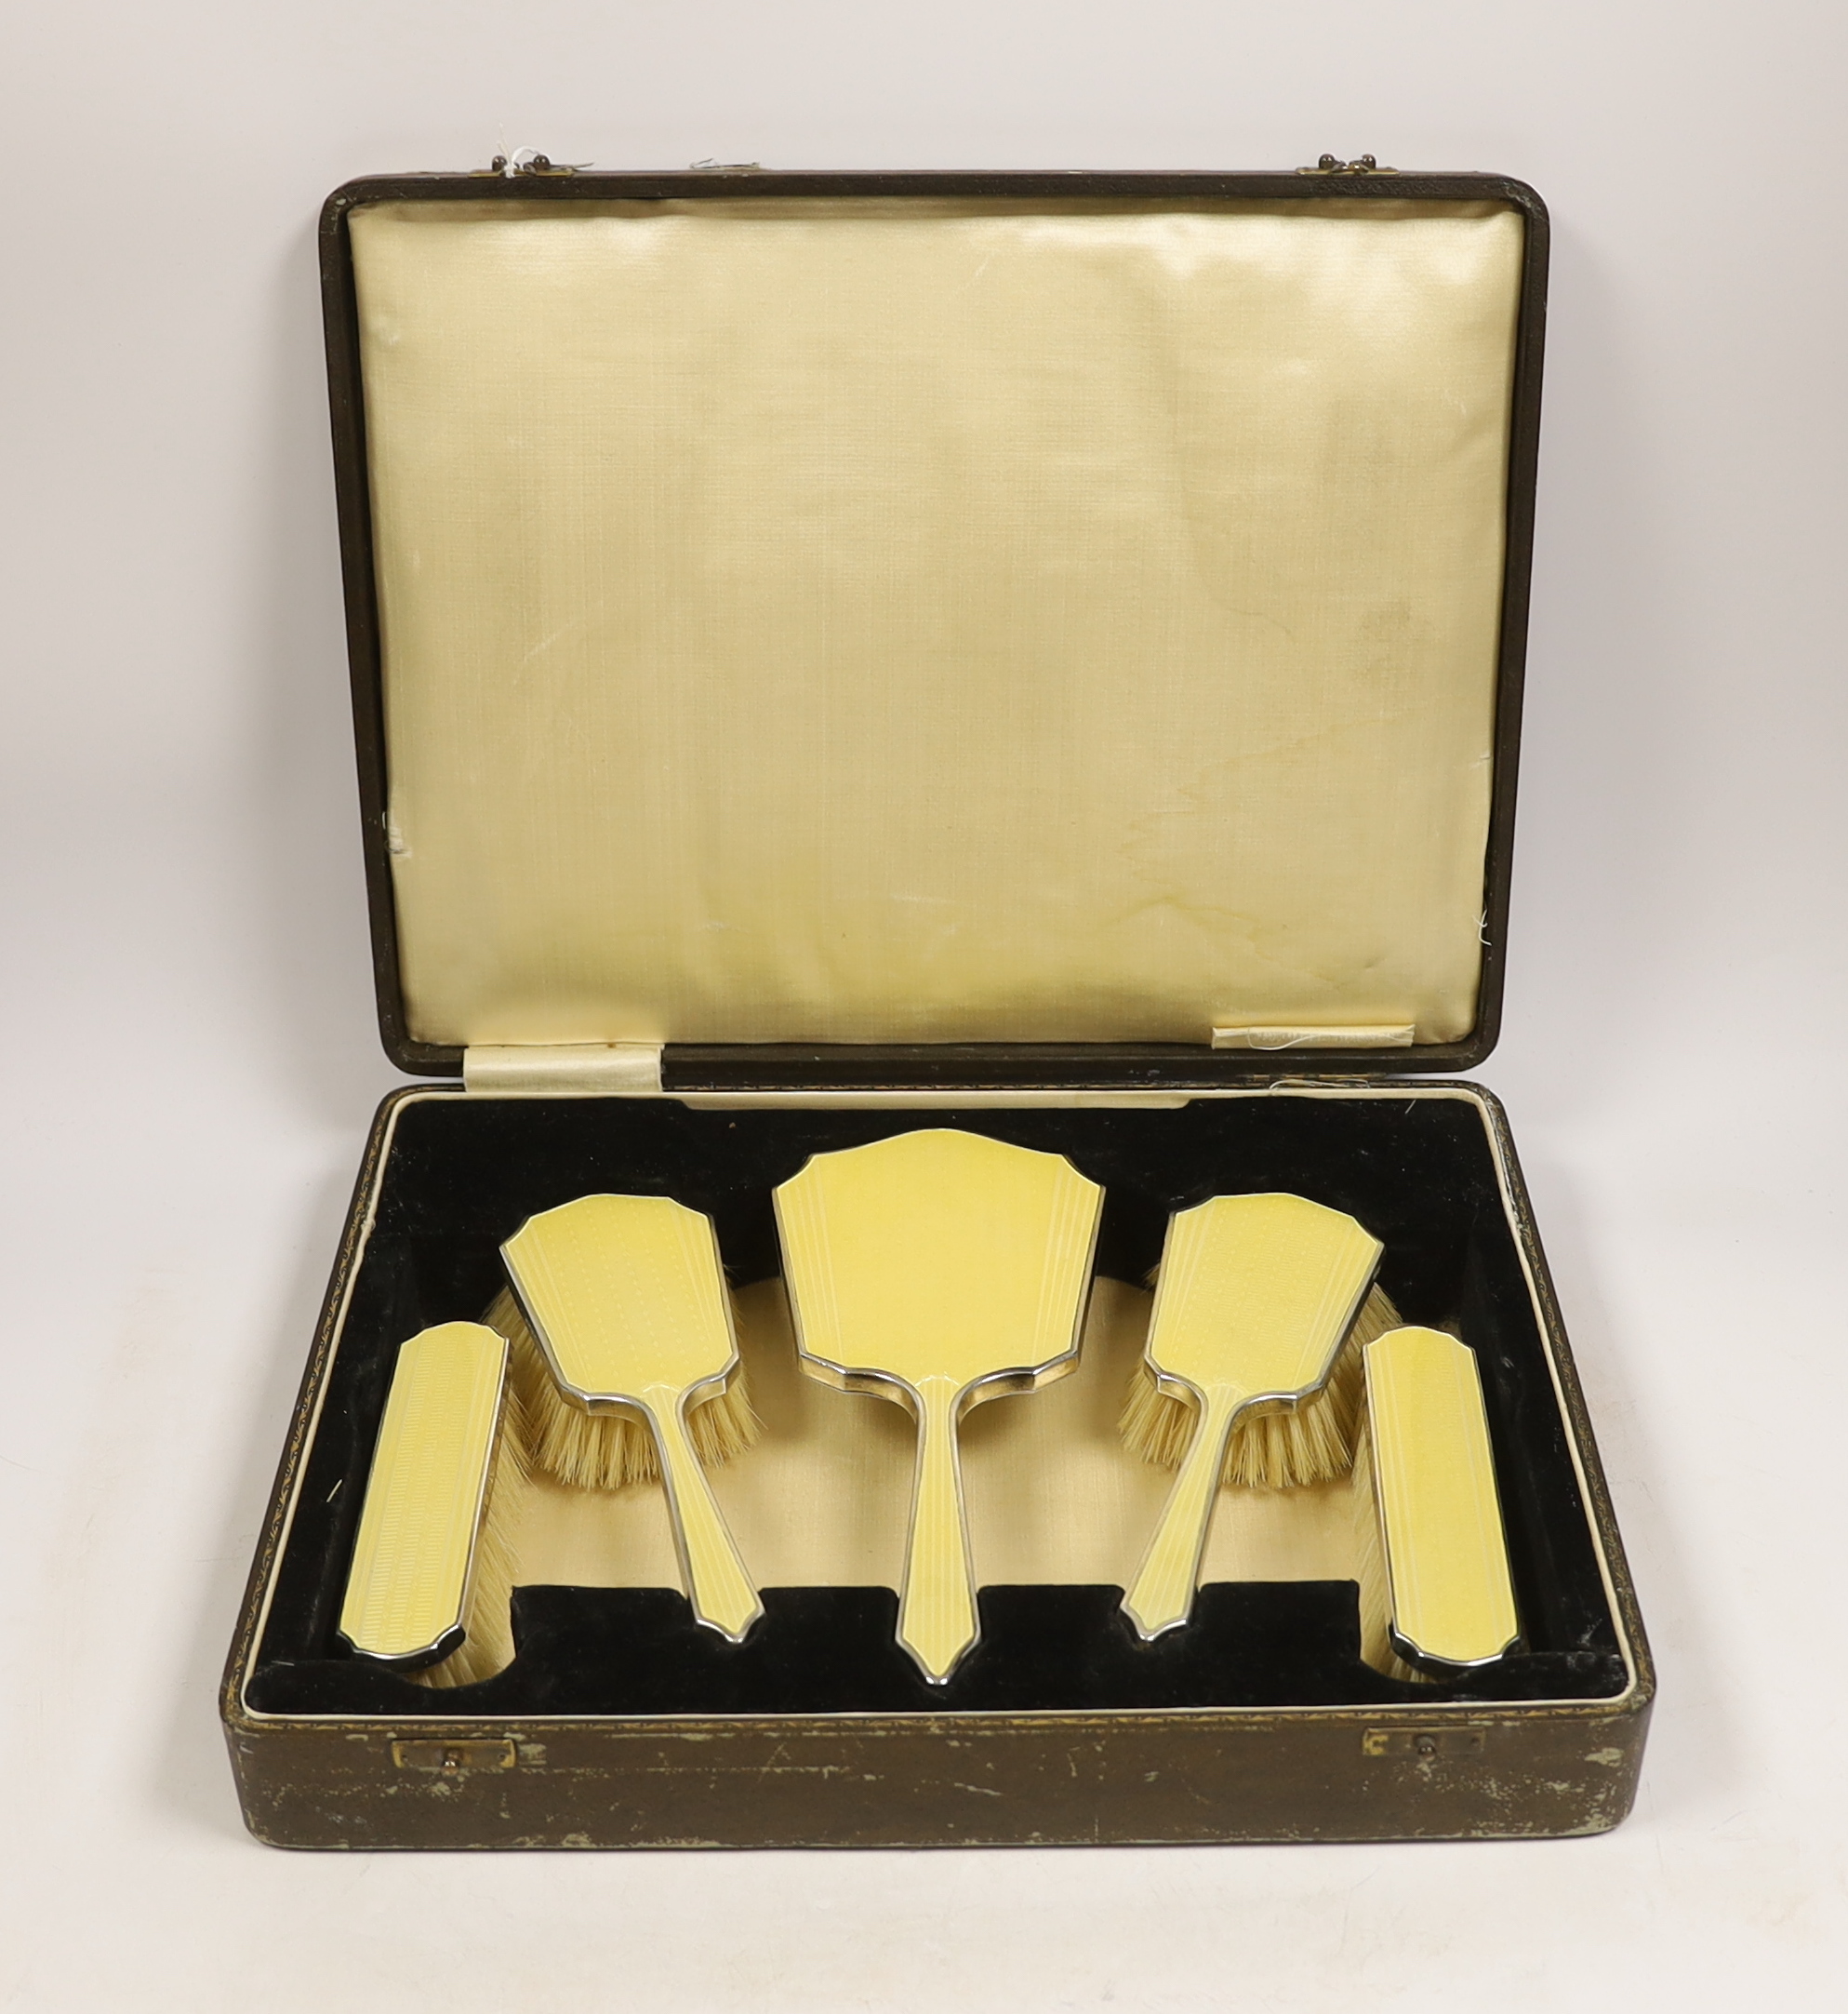 A cased George V silver and yellow guilloche enamel mounted five piece mirror and brush set, Hassett & Harper. Birmingham, 1935.